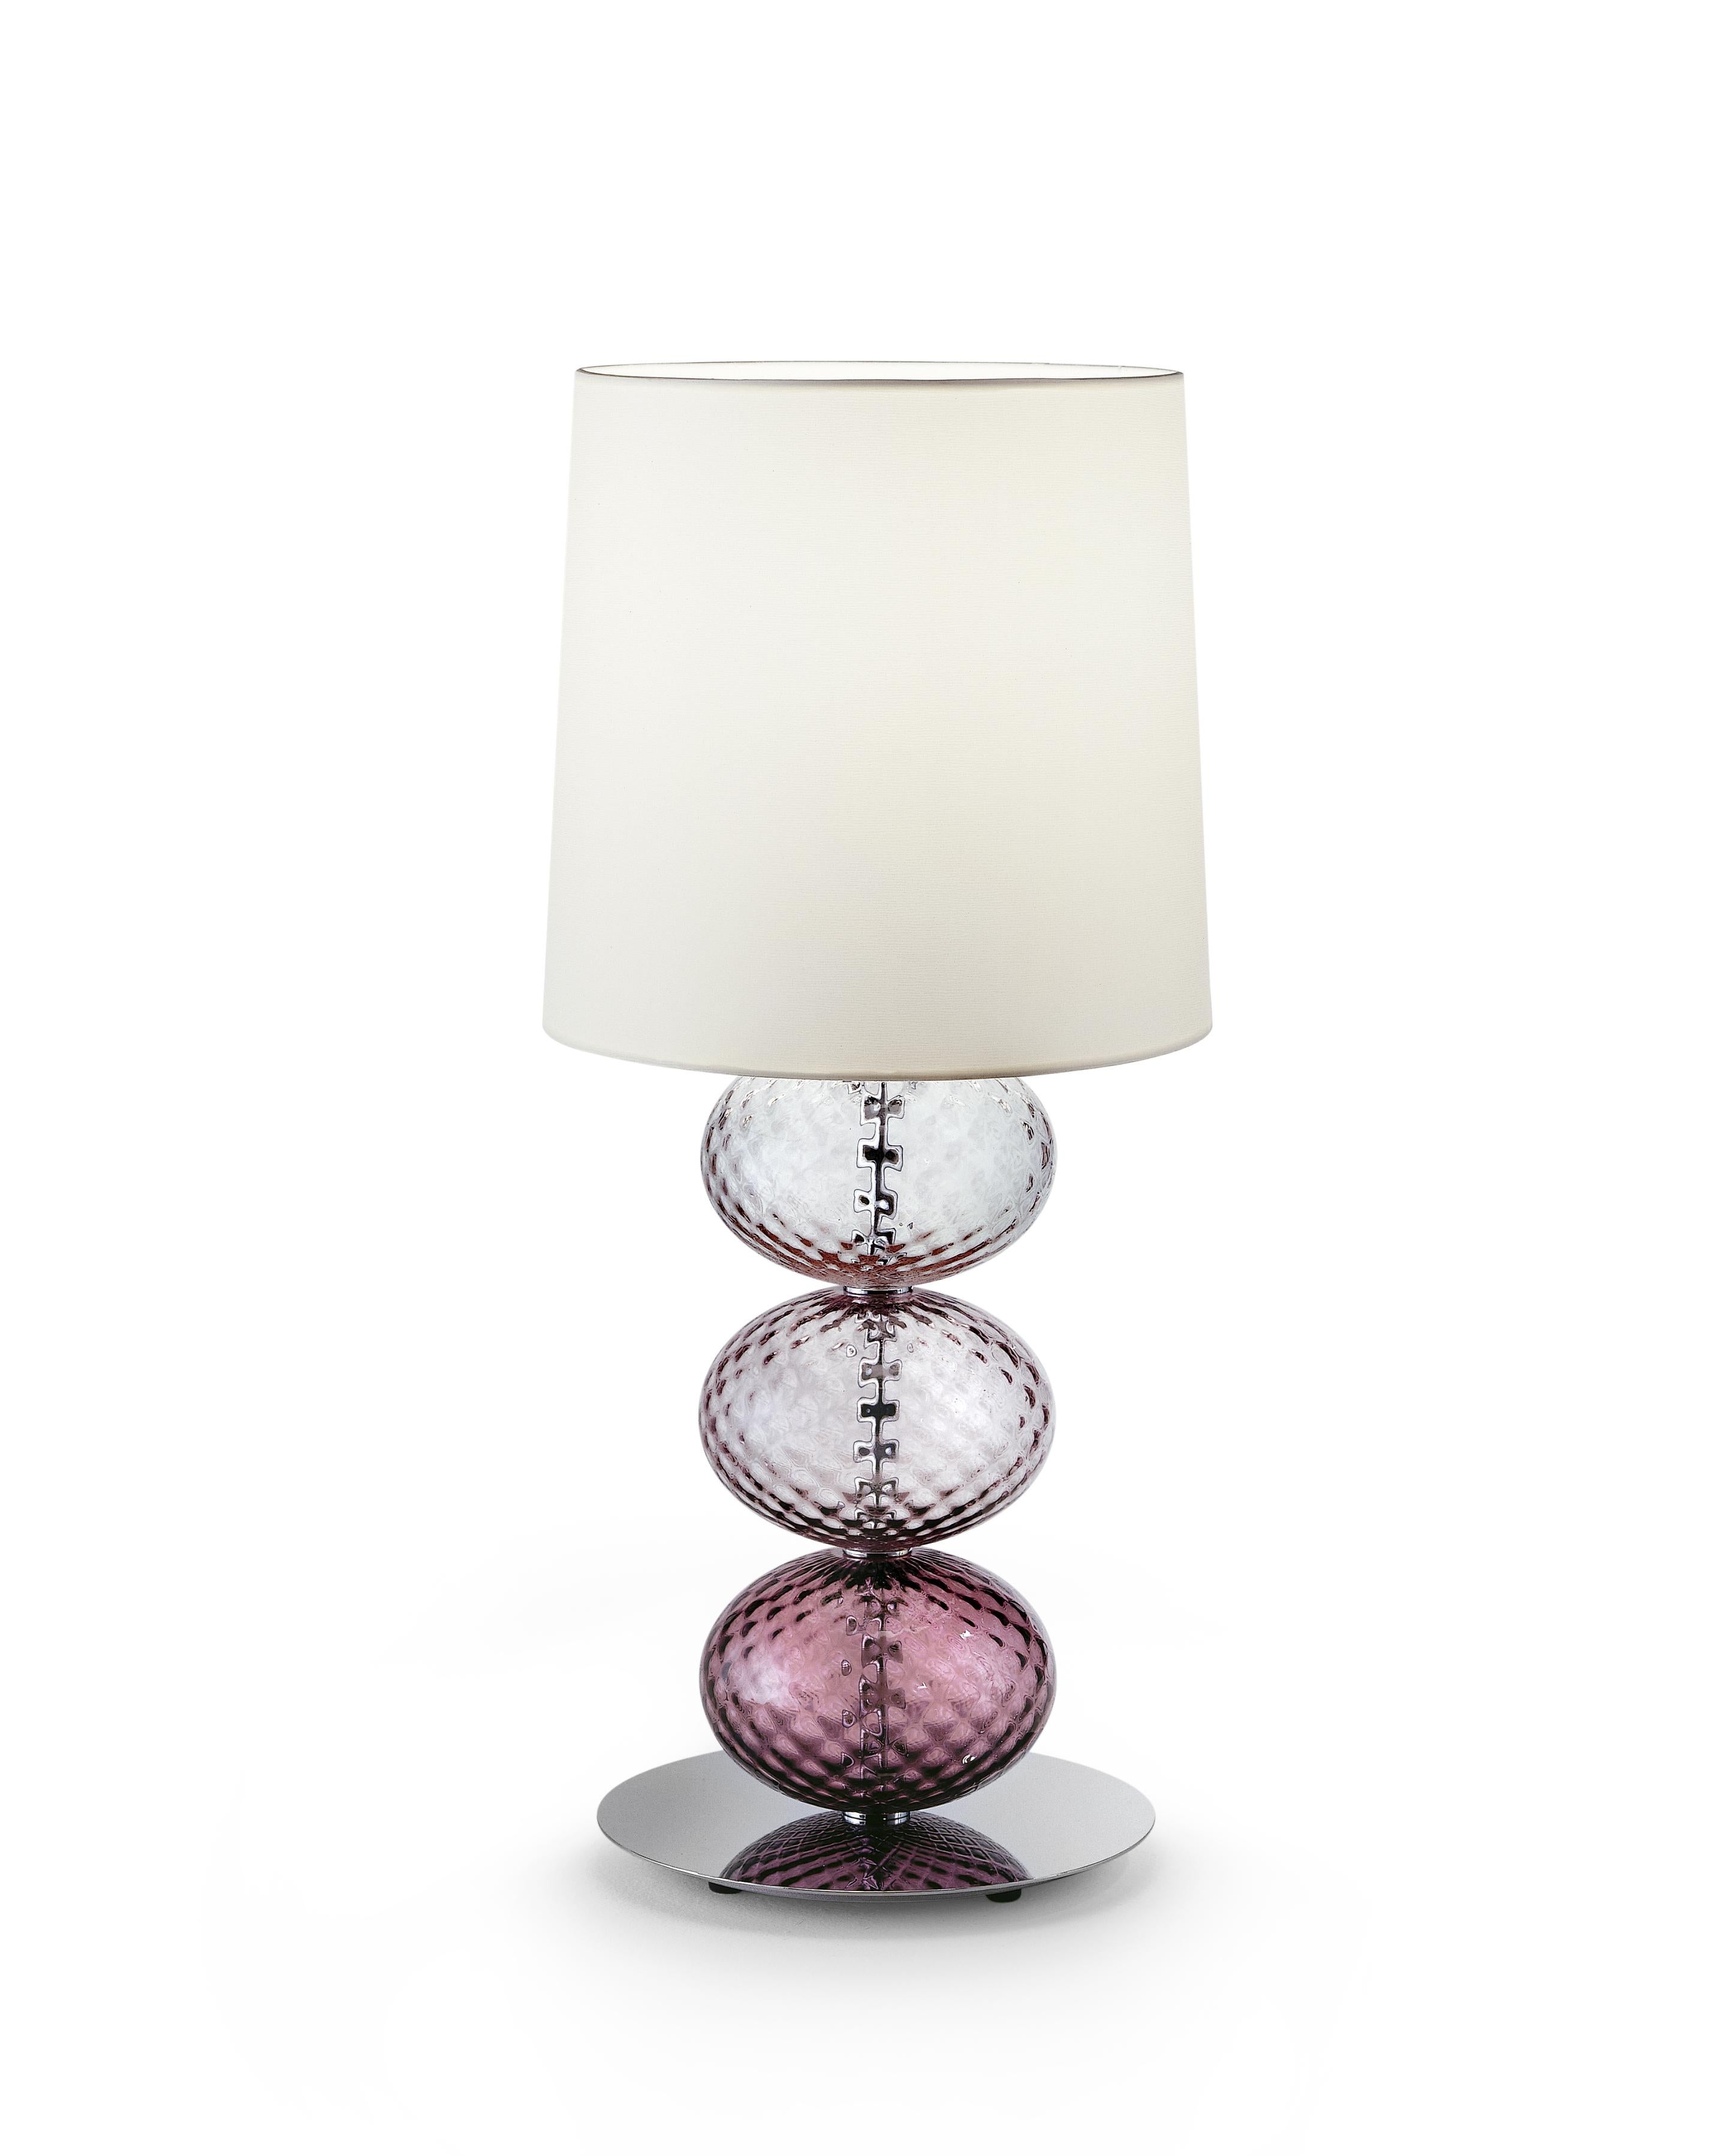 Abat Jour table lamp with white fabric shade, chromium-plated stand and hand-made blown glass elliptical elements. Its combination of white and color make it a subtle yet playful addition to any room. Also available in other colors and as a floor